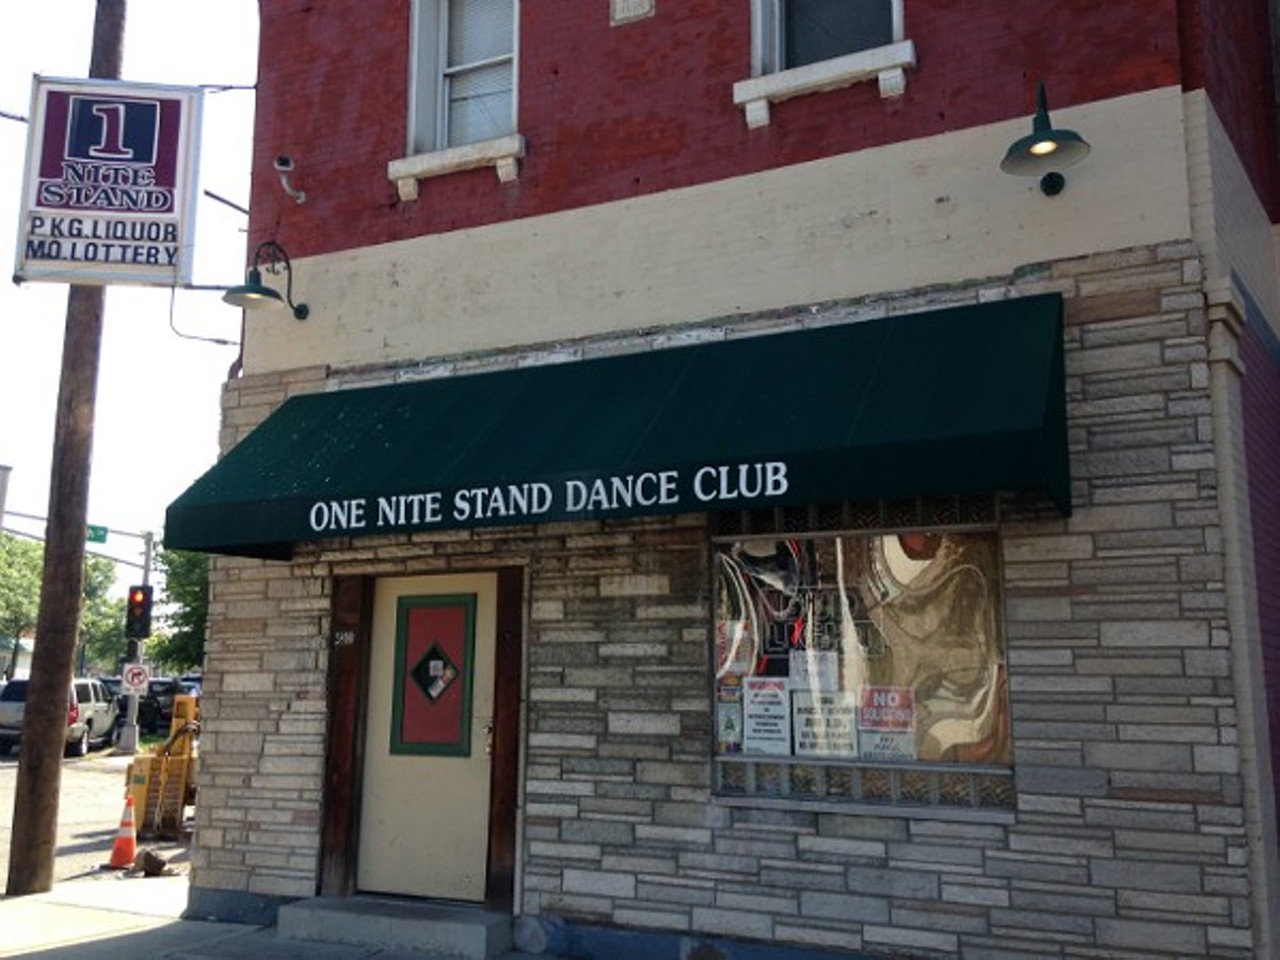 One Nite Stand Dance Club
(2800 Ohio Avenue, 314-776-0996)
The One Nite Stand Dance Club has the best name in the business. Located just off Gravois Avenue on the border of Benton Park West and Fox Park, it has attracted more than few first-timers out of sheer curiosity. The other main draw is karaoke on Friday and Saturday nights. Expect a patdown and a once-over with a metal detector wand on those nights. Once inside, the place is bigger than expected. The main barroom is a long rectangle, with a bar on the right and pool table in the back. A ramp leads up to a second area with another pool table and a stripper pole, just in case your rendition of "Sexual Healing" could use a little more juice. The crowd is diverse, although not always comfortably. A Confederate flag was removed from the entrance several years ago, but white and black patrons tend to self-segregate inside the hazy nightclub. You're in for a strange time here, but isn't that why you came?
Photo courtesy of Doyle Murphy